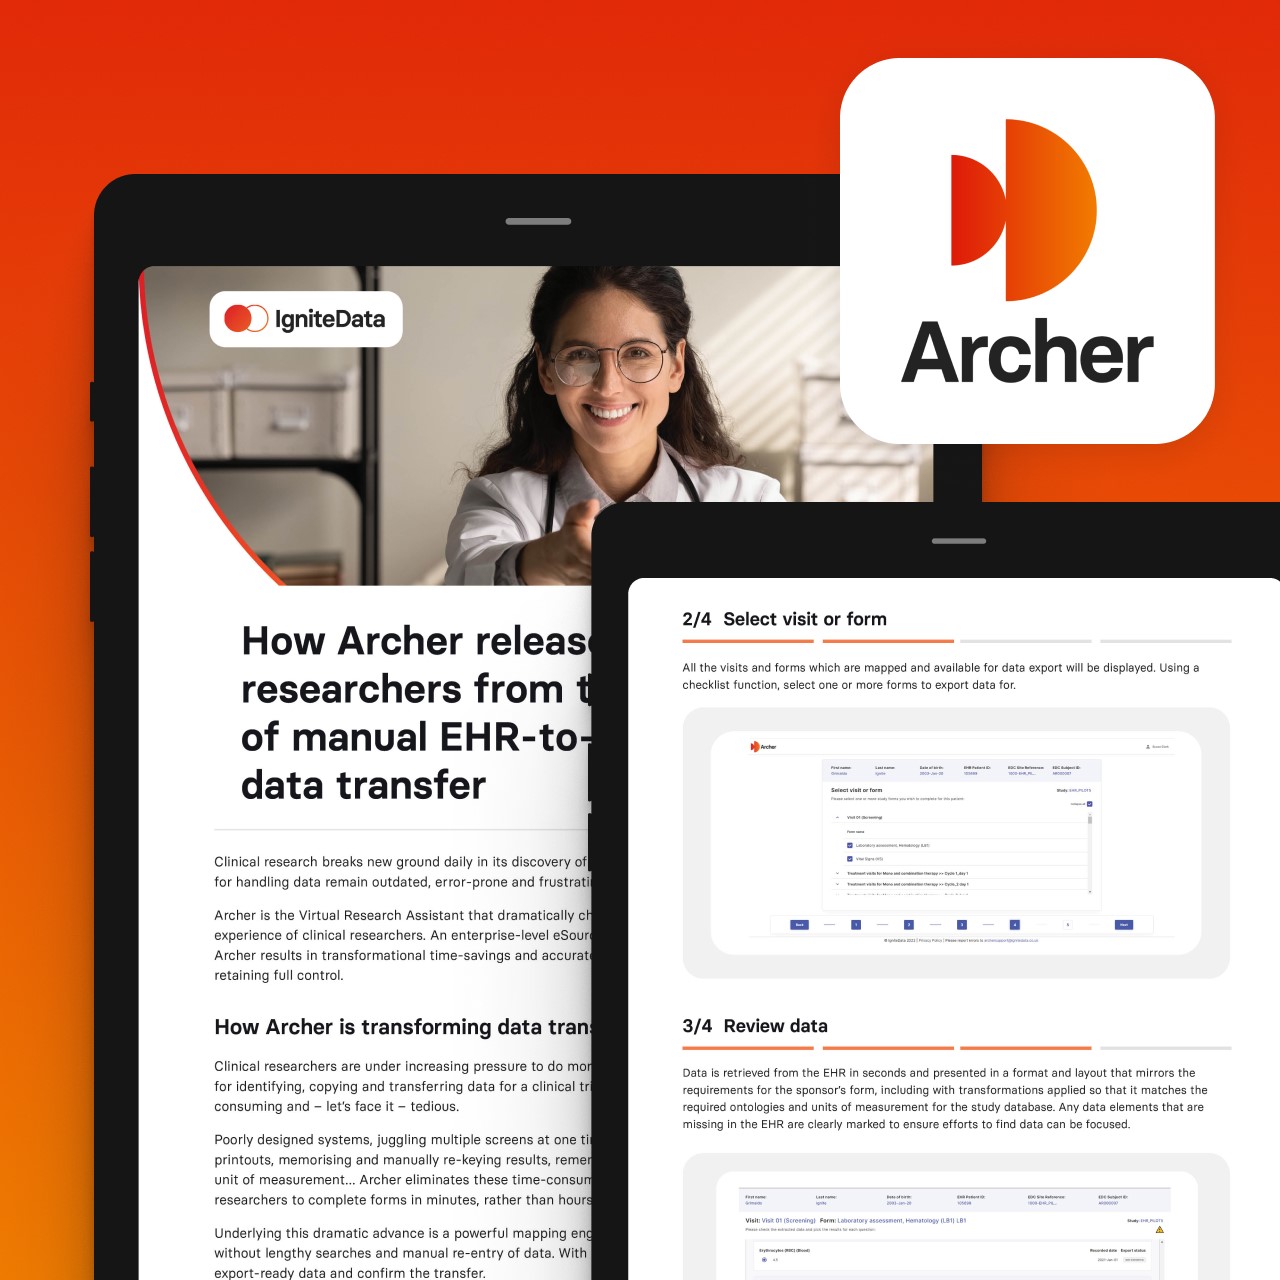 Archer information sheet for clinical researchers